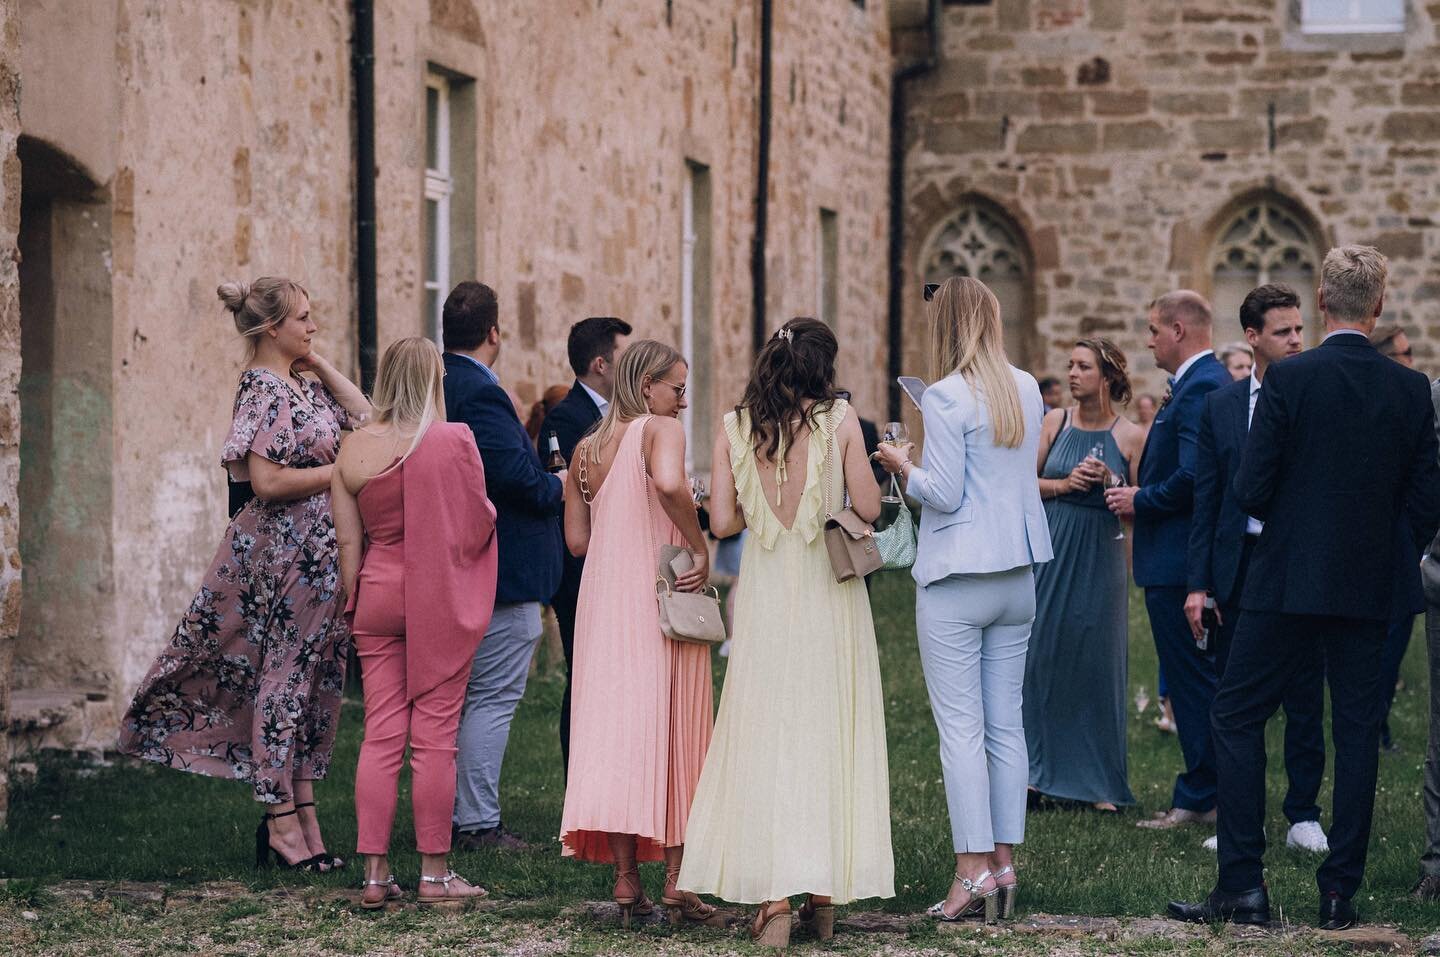 in love with the colorful dresses of the wedding guests
.
.
.
.
#weddingguests #dresses #weddingdresses #documentaryweddingphotography #standesamtrheine #weddingweekend #cheers  #weddingphotographer #m&uuml;nsterhochzeit #heirateninm&uuml;nster #civi